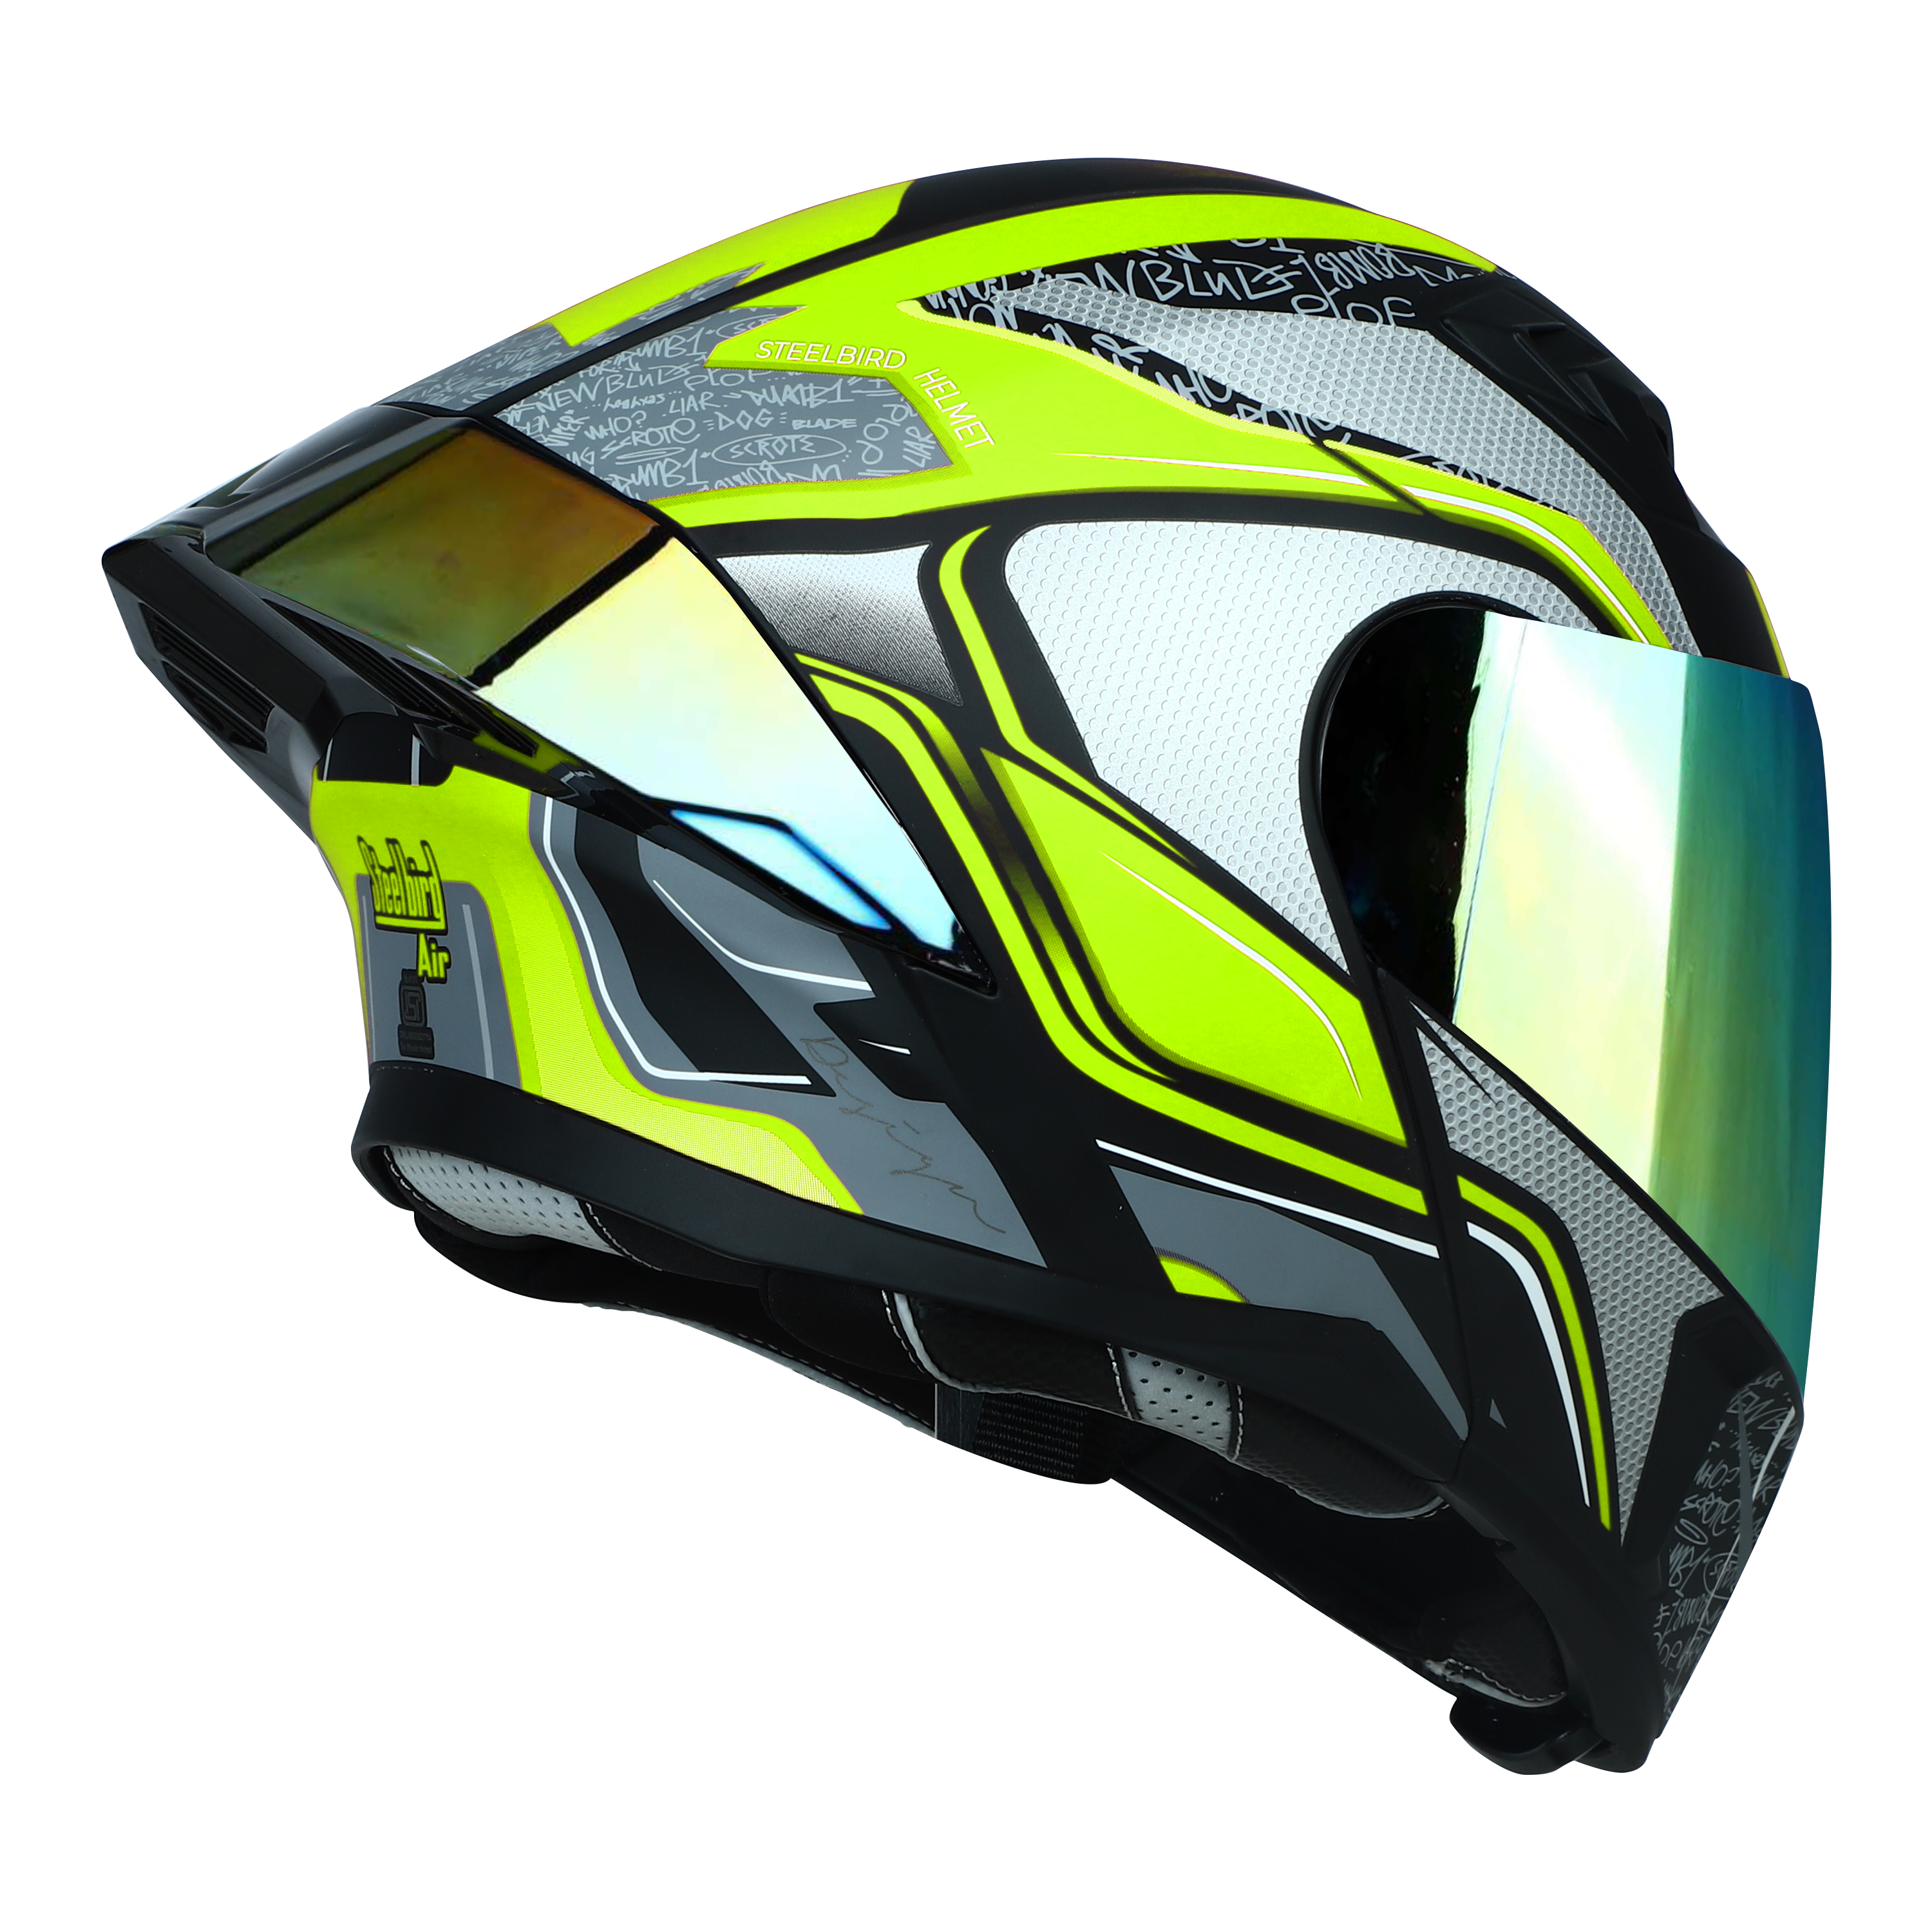 SBA-20 ISS Racer Glossy Black With Neon